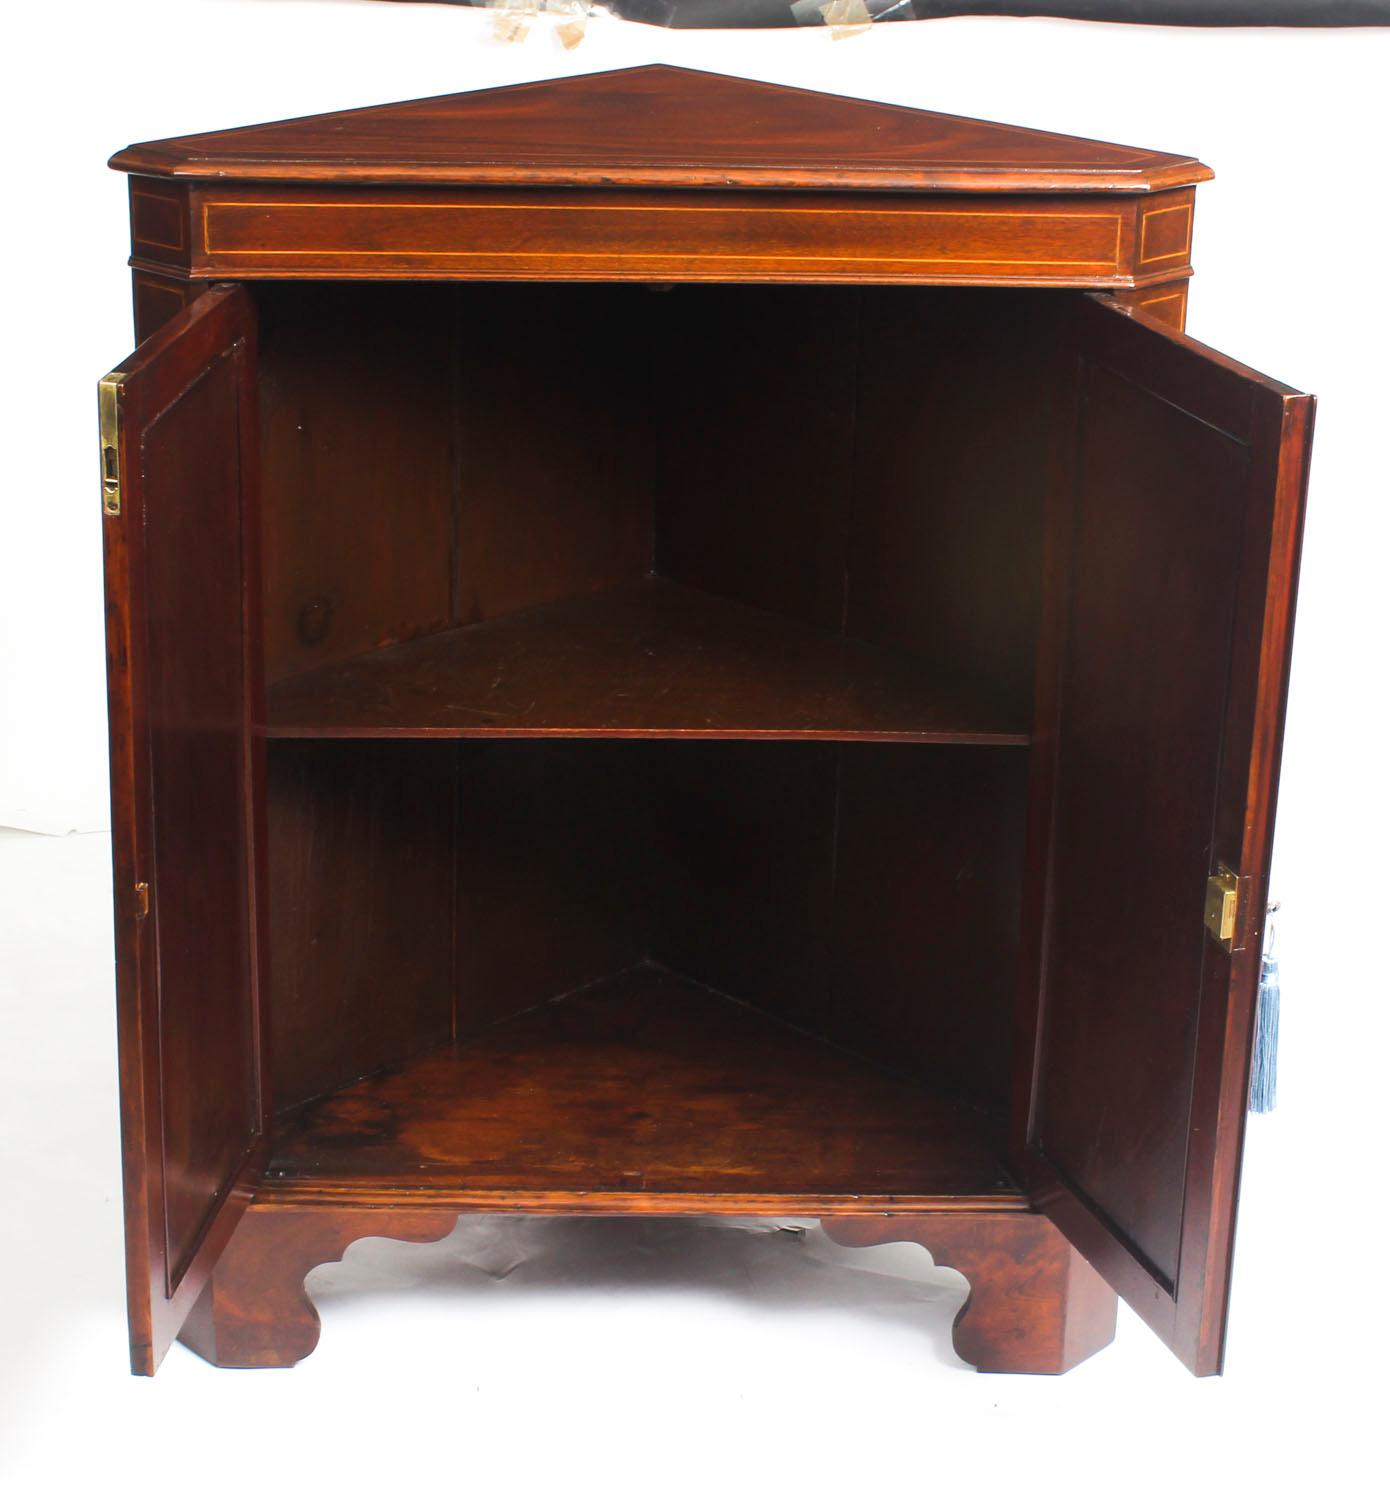 Early 20th Century Mahogany and Satinwood Inlaid Low Corner Cabinet 2